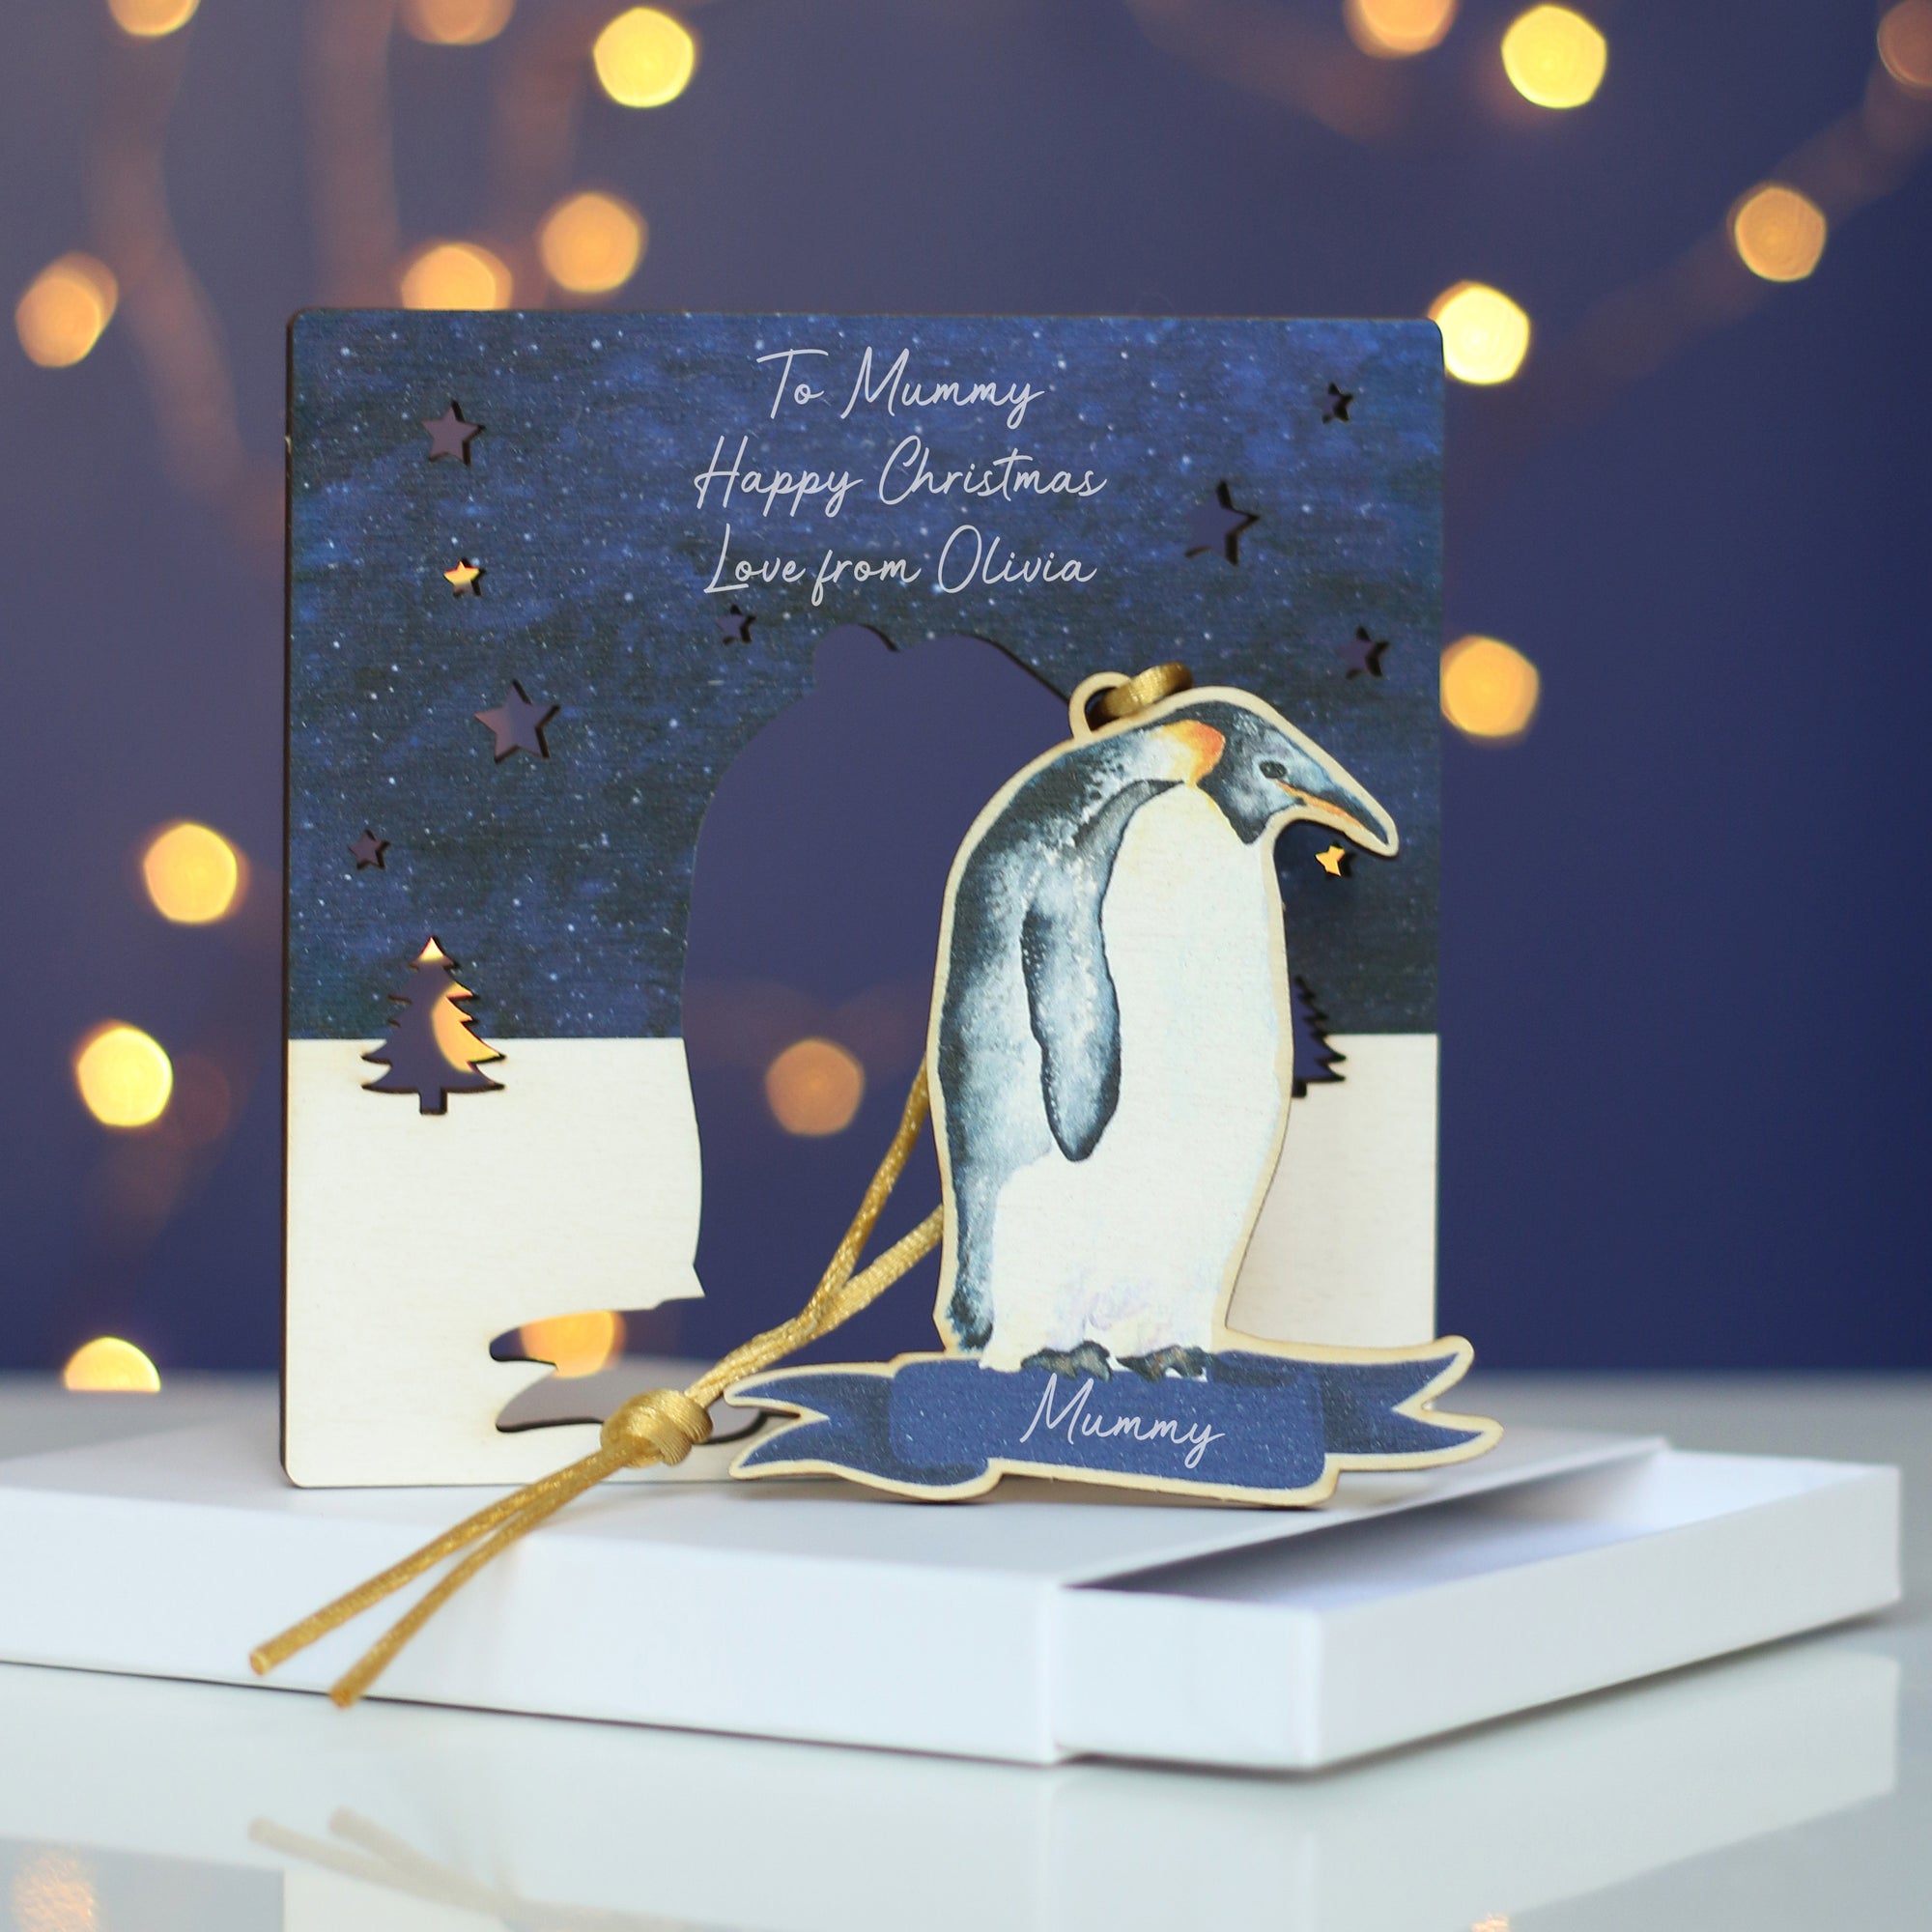 A wooden penguin Christmas decoration stands on a white gift box. The penguin has been "popped out" of a wooden surround that is also an alternative Christmas card. In the background there is a blue wall and twinkly lights 